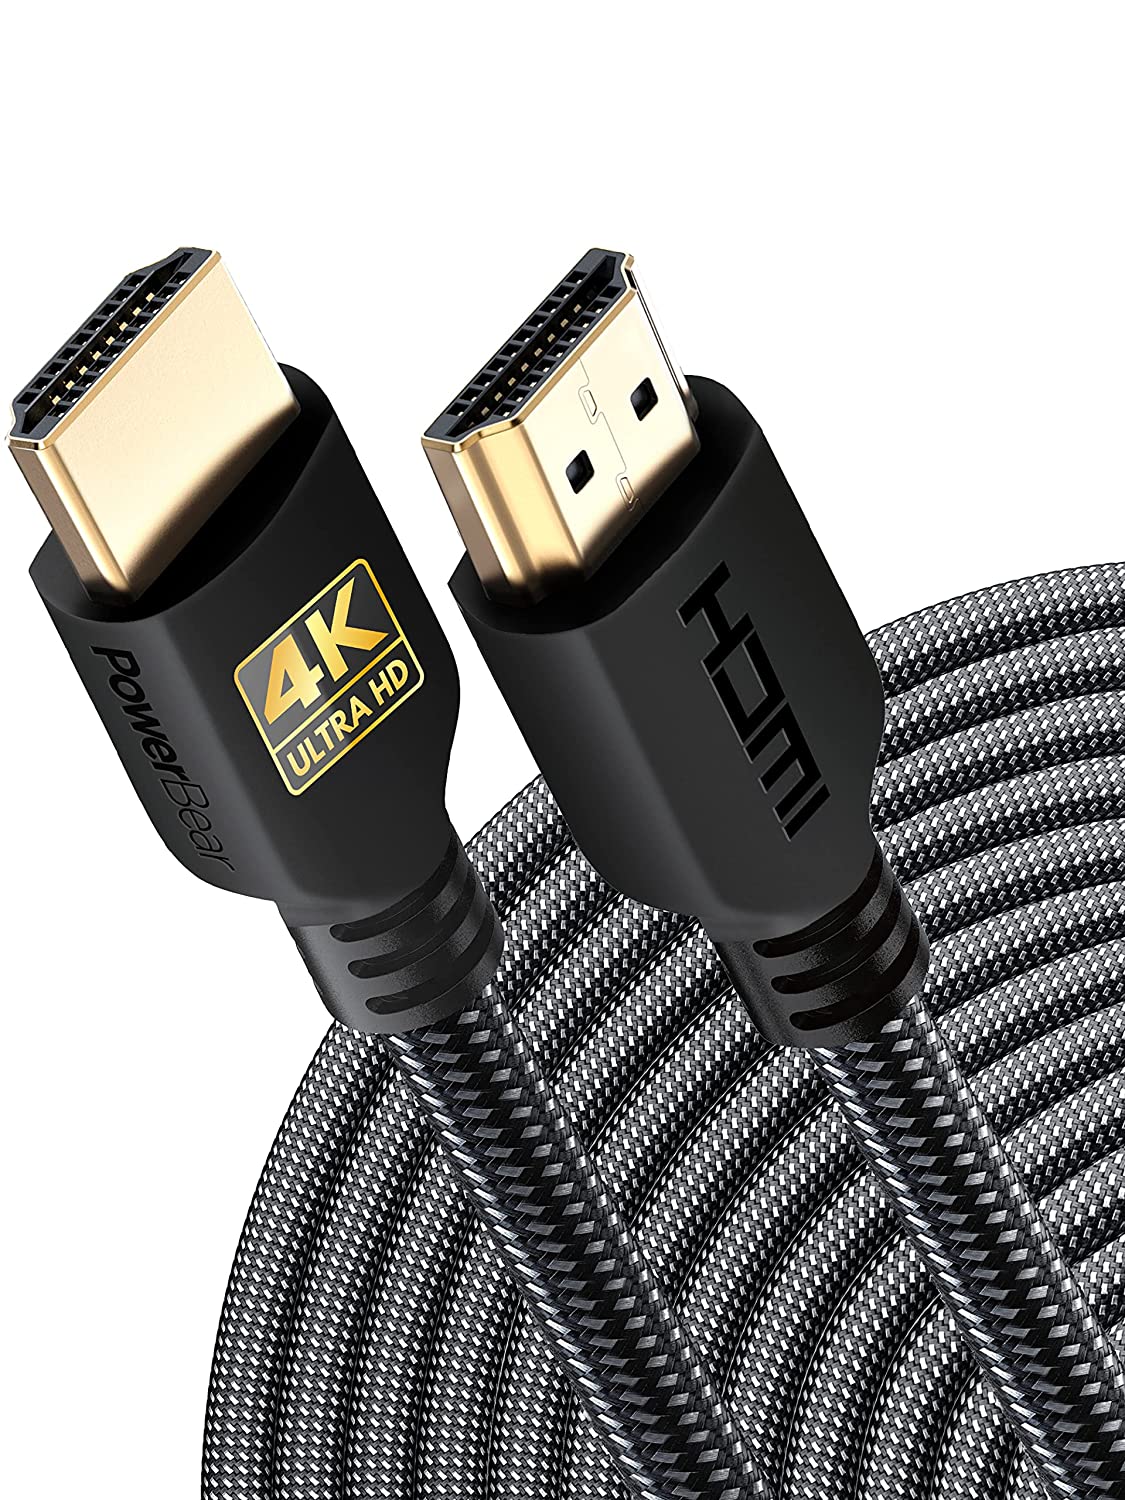  2. PowerBear 4K HDMI Cable 50 ft 